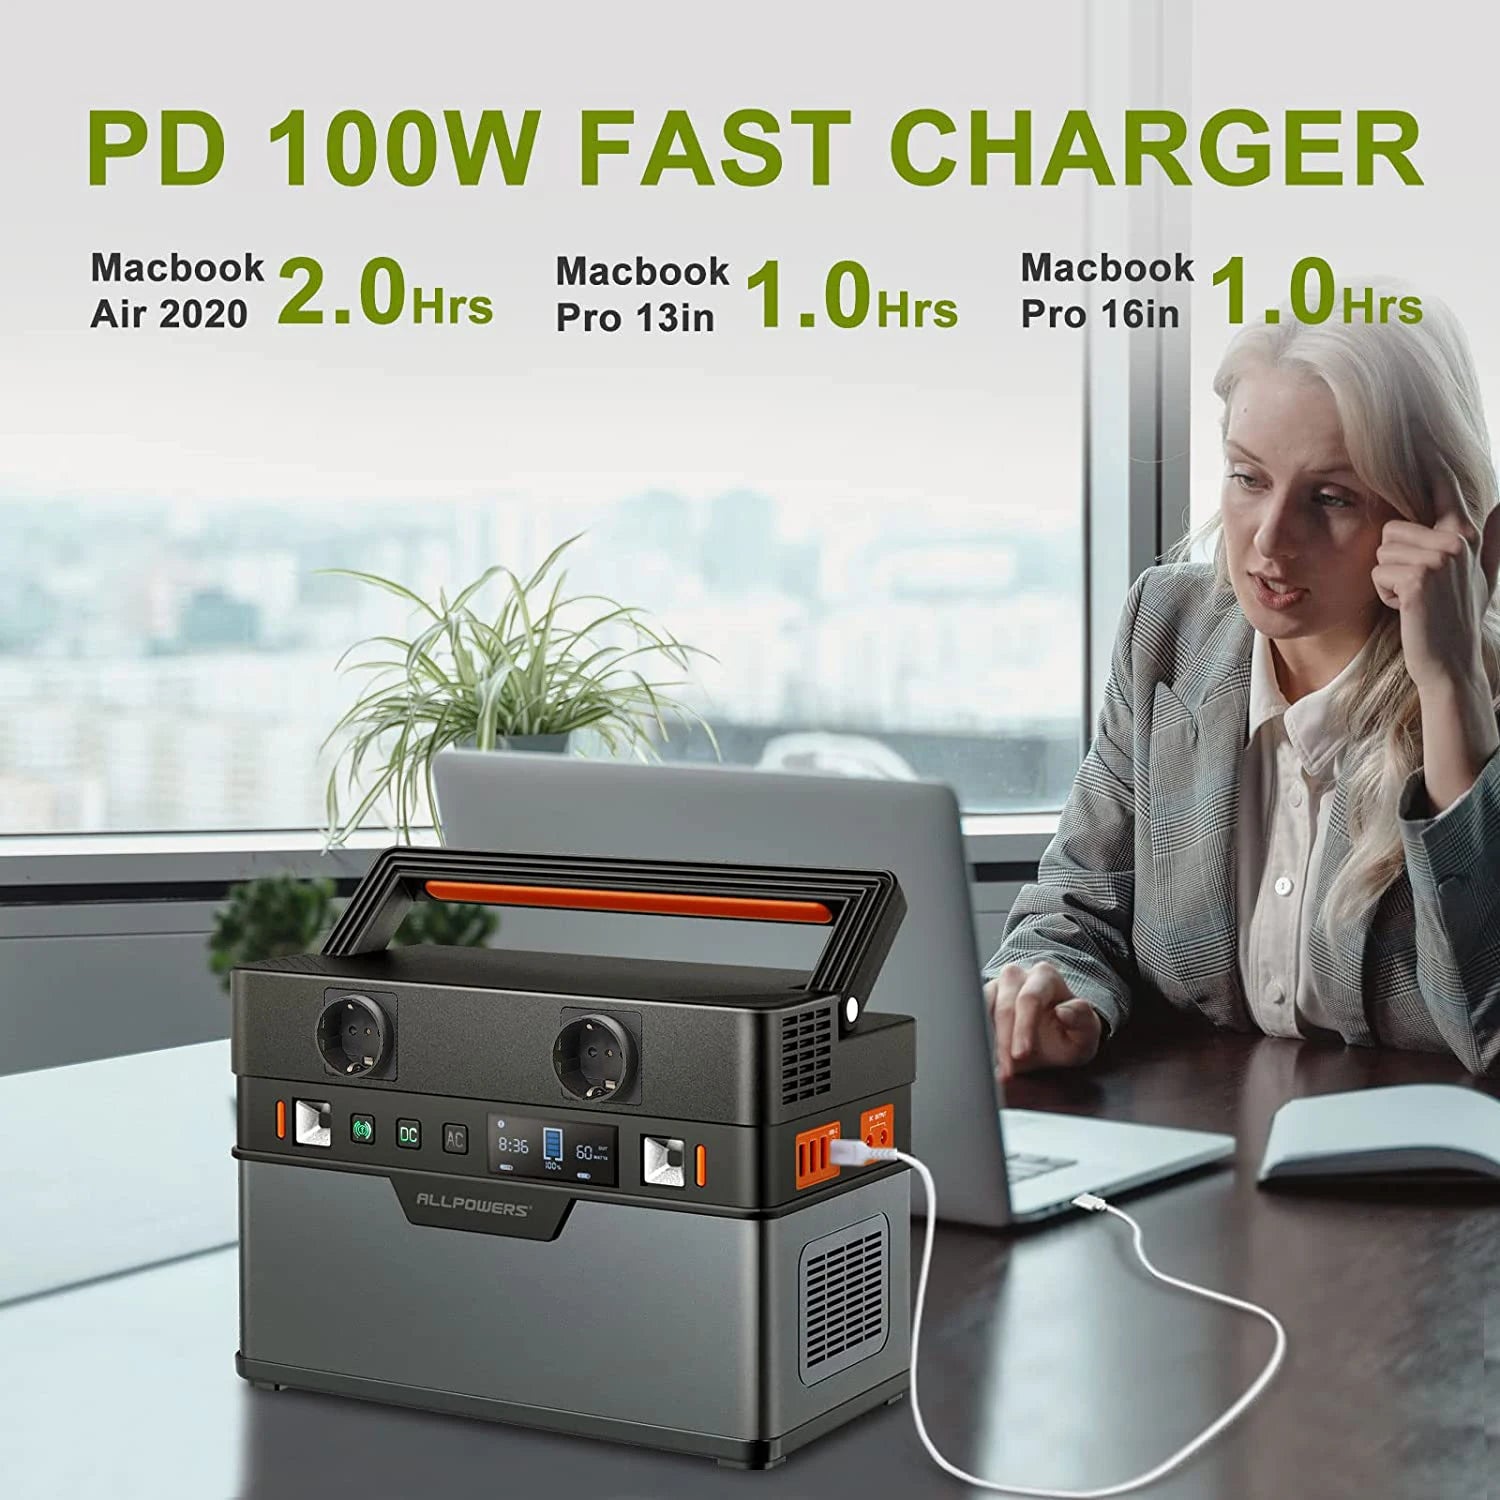 ALLPOWERS 700W Portable Power Station, Fast charging capabilities for MacBooks: 2 hours for MacBook, 1 hour for Air, and 1 hour for Pro.